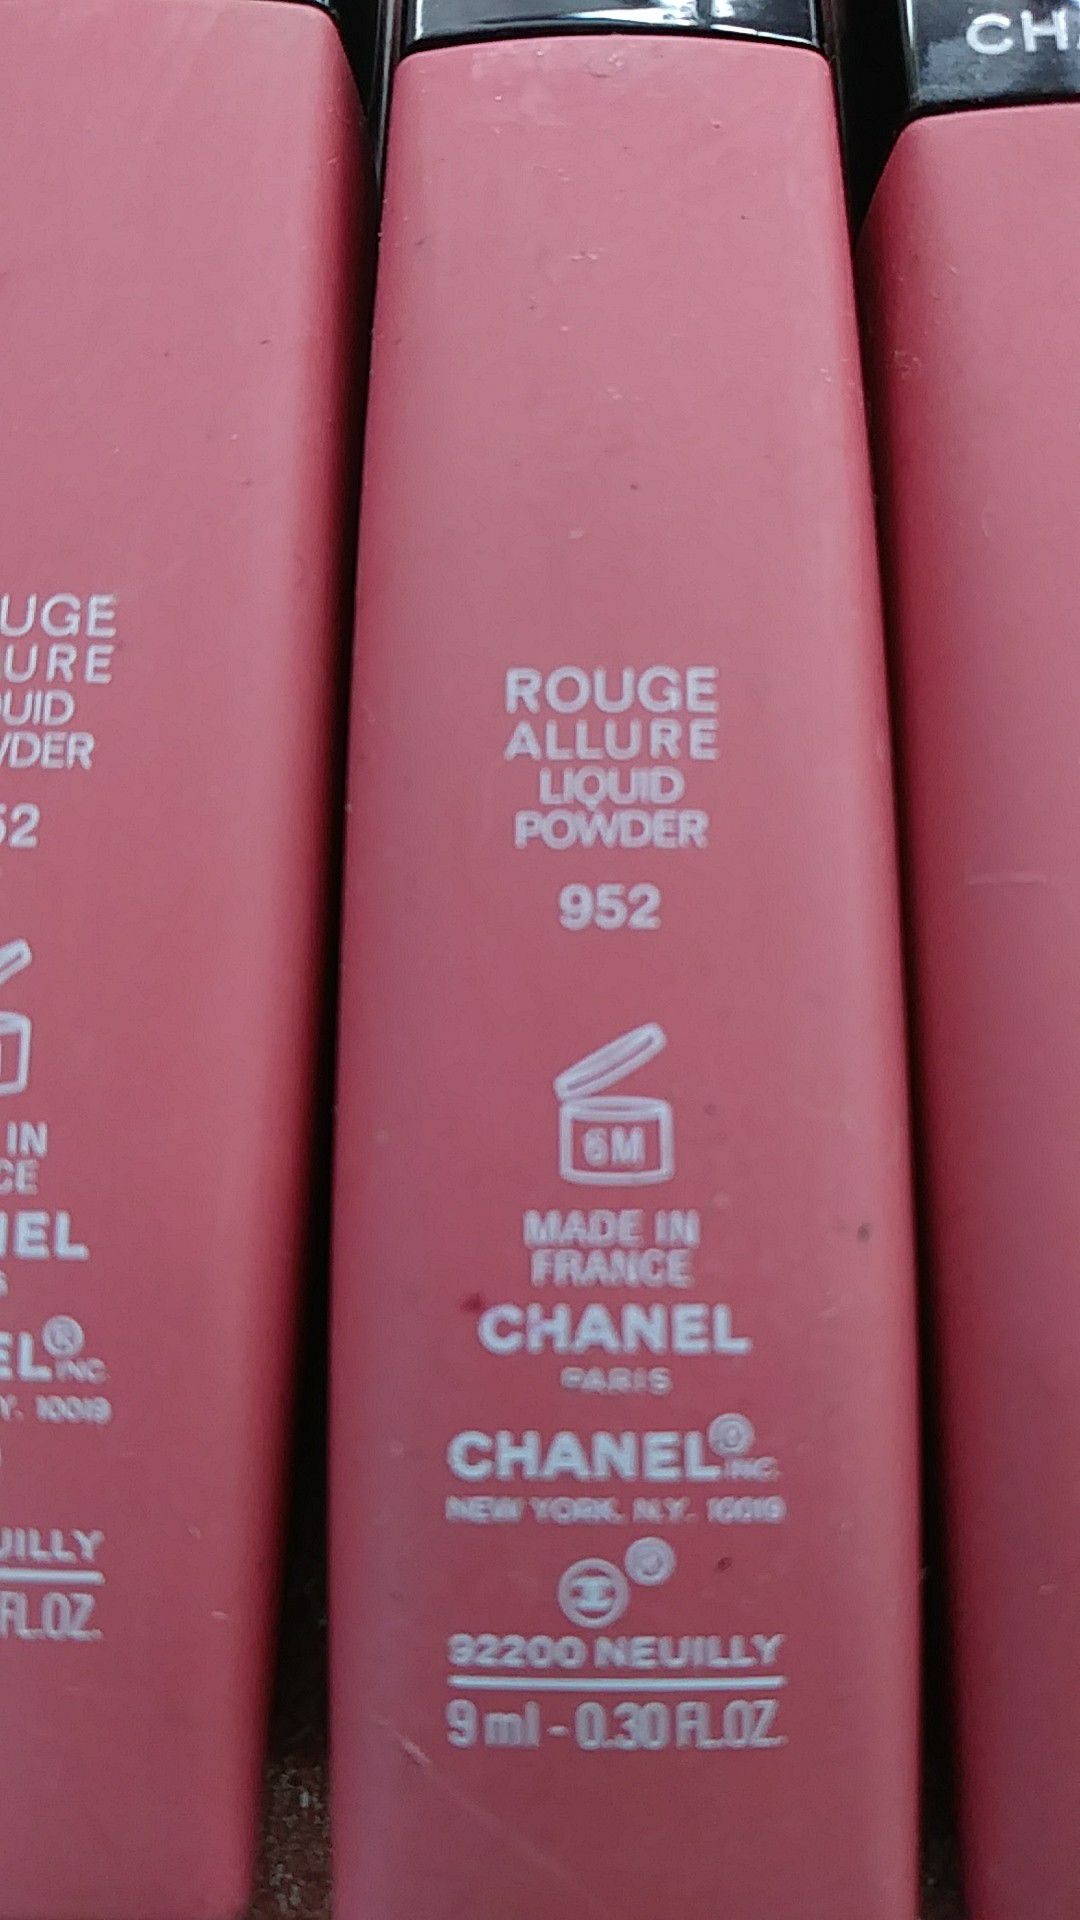 Rouge Allure Liquid Powder #956 for Sale in Los Angeles, CA - OfferUp